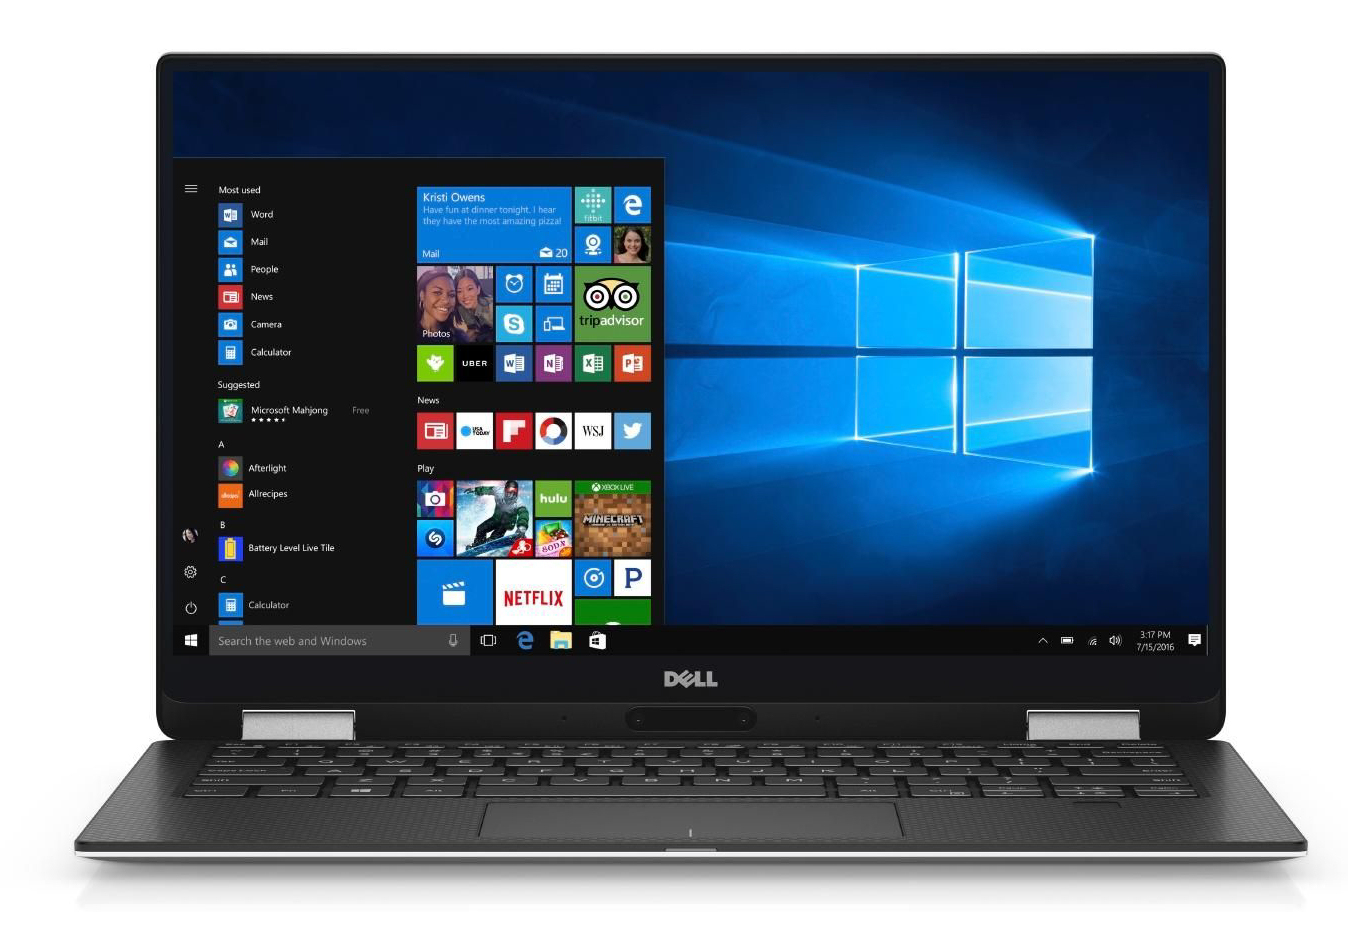 Dell XPS 13 9365 Intel i7 8500Y 1.50GHz 8GB RAM 512GB SSD 13.3" Touch Win 11 Full Size Image